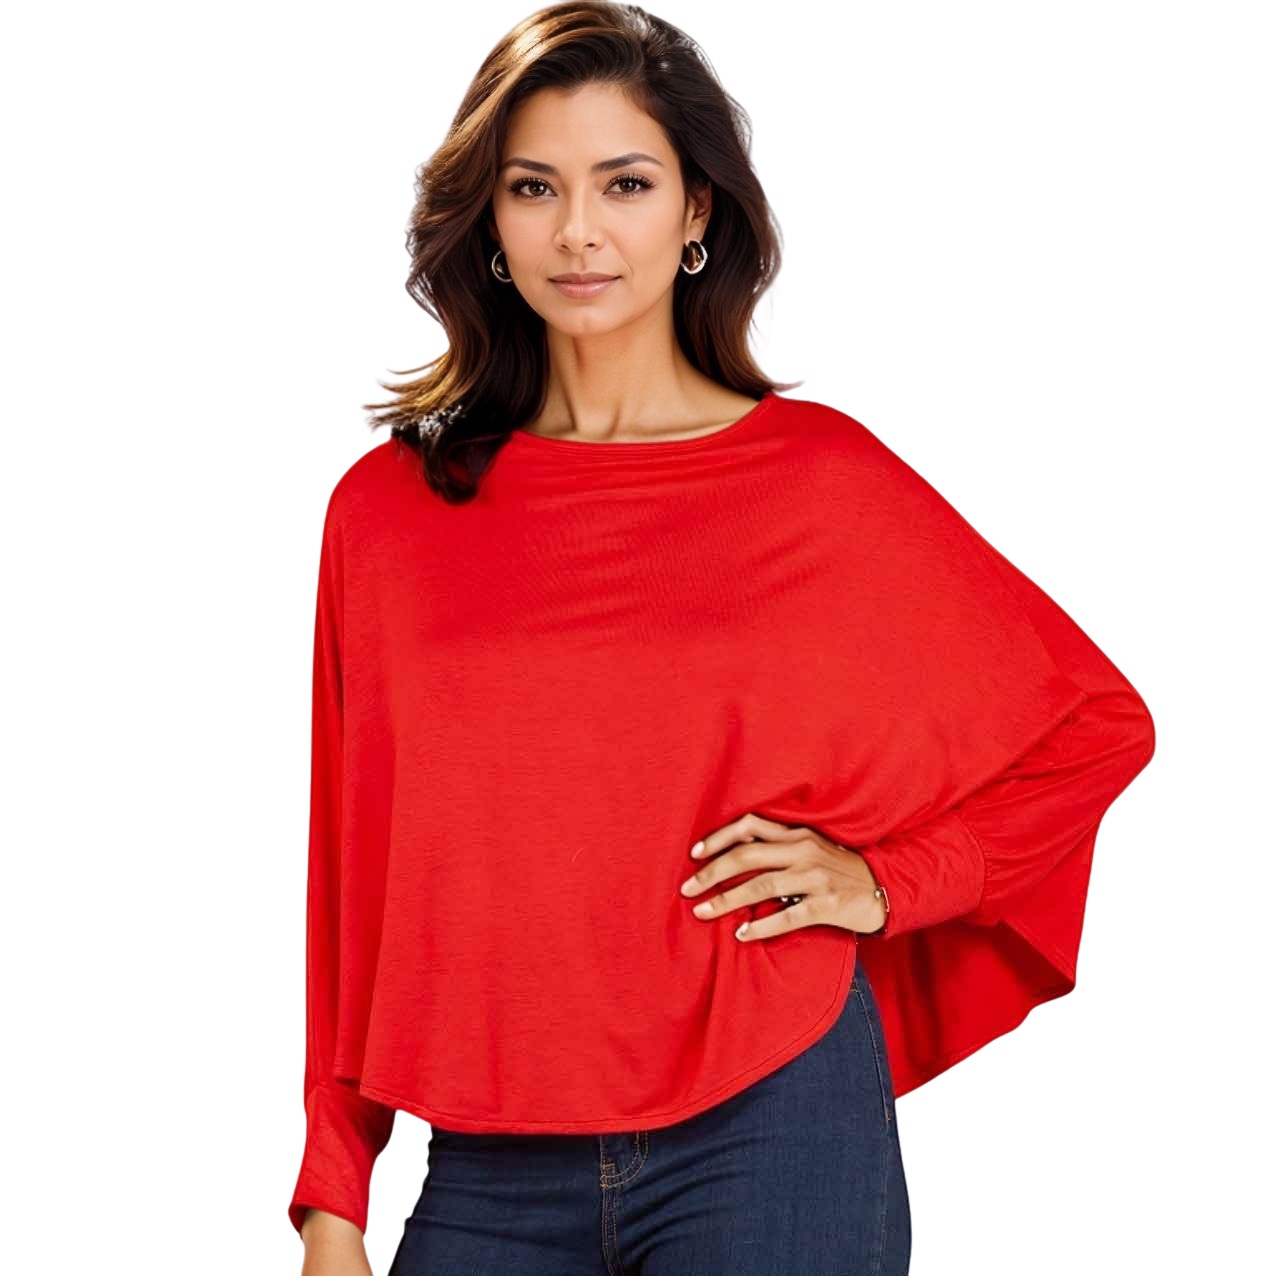 1818 - Red<br>
Poncho with Sleeves